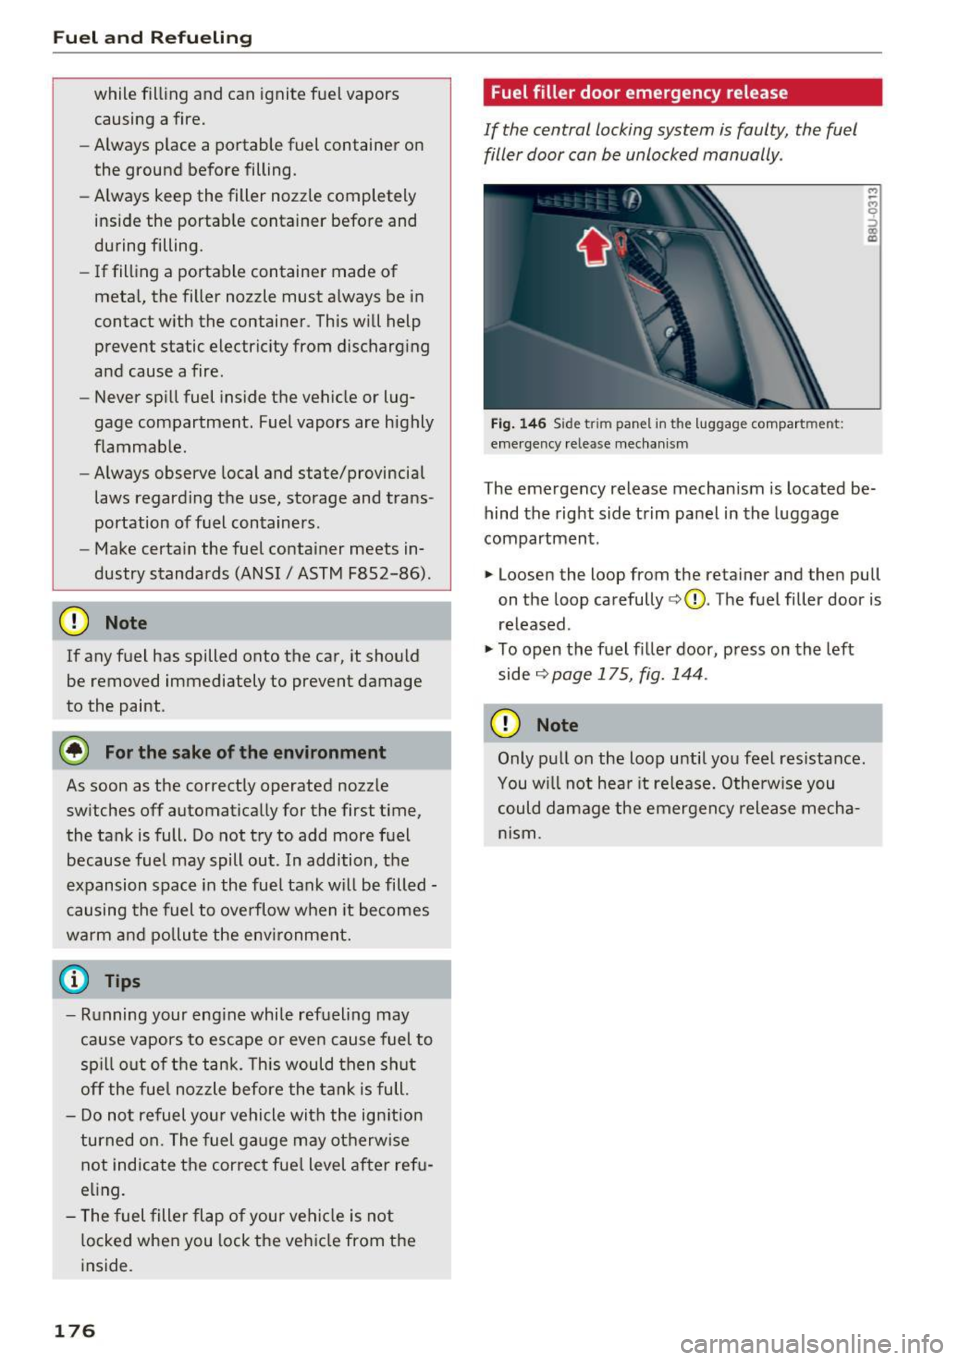 AUDI Q3 2016 Owners Manual Fuel and Refueling 
while  filling  and  can  ignite  fuel  vapors 
causing  a fire. 
- Always  p lace  a  portable  fuel  container  on 
the  ground  before  filling. 
- Always  keep  the  filler  no